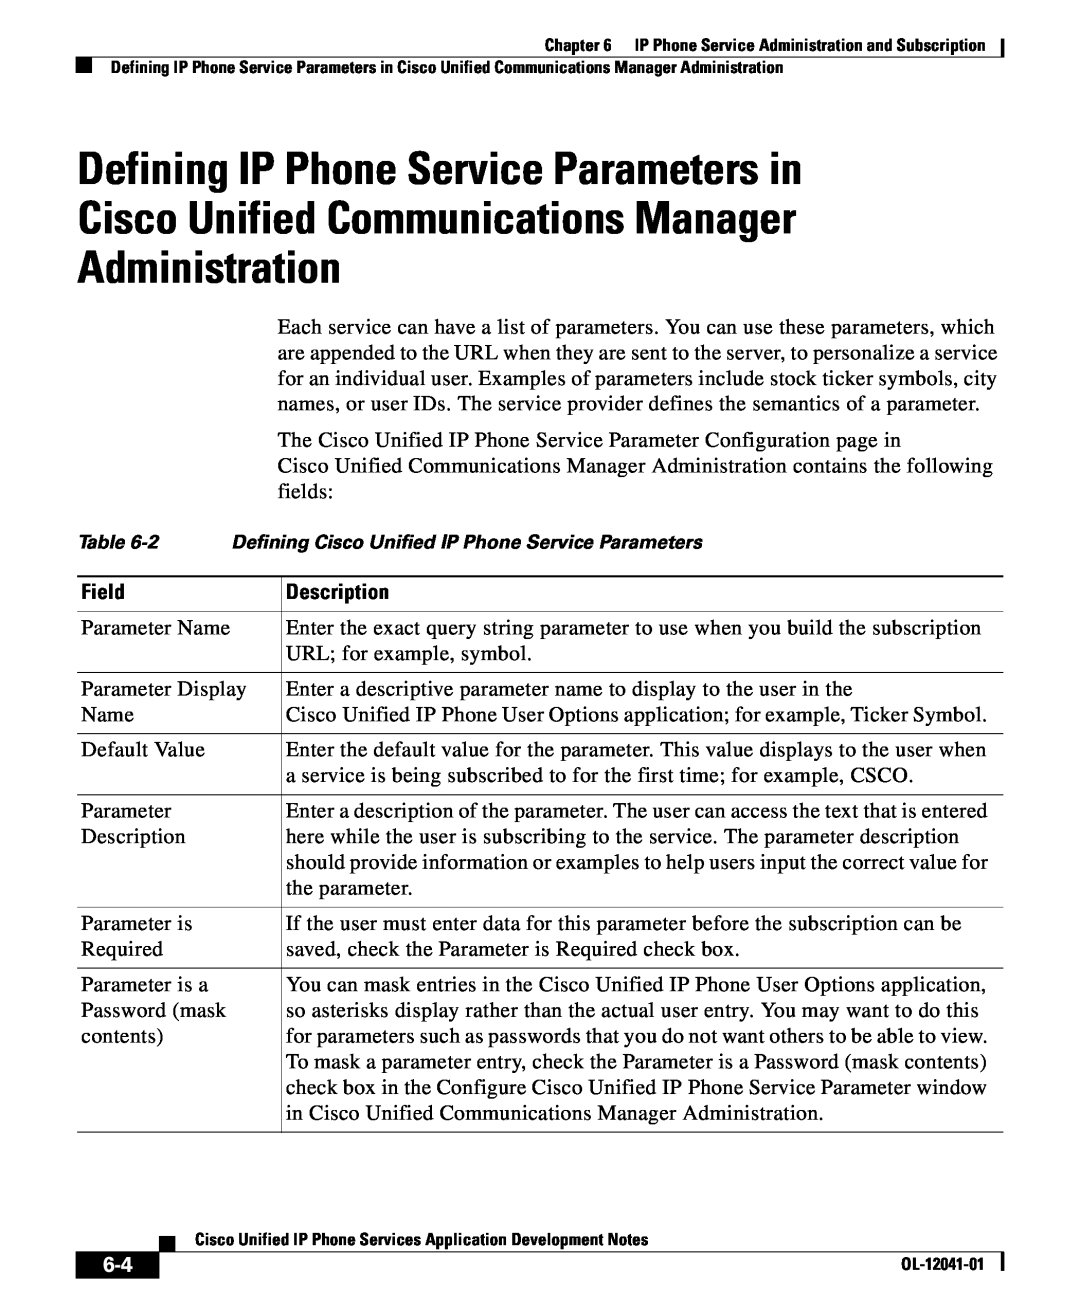 Cisco Systems OL-12041-01 Defining IP Phone Service Parameters in, Cisco Unified Communications Manager Administration 